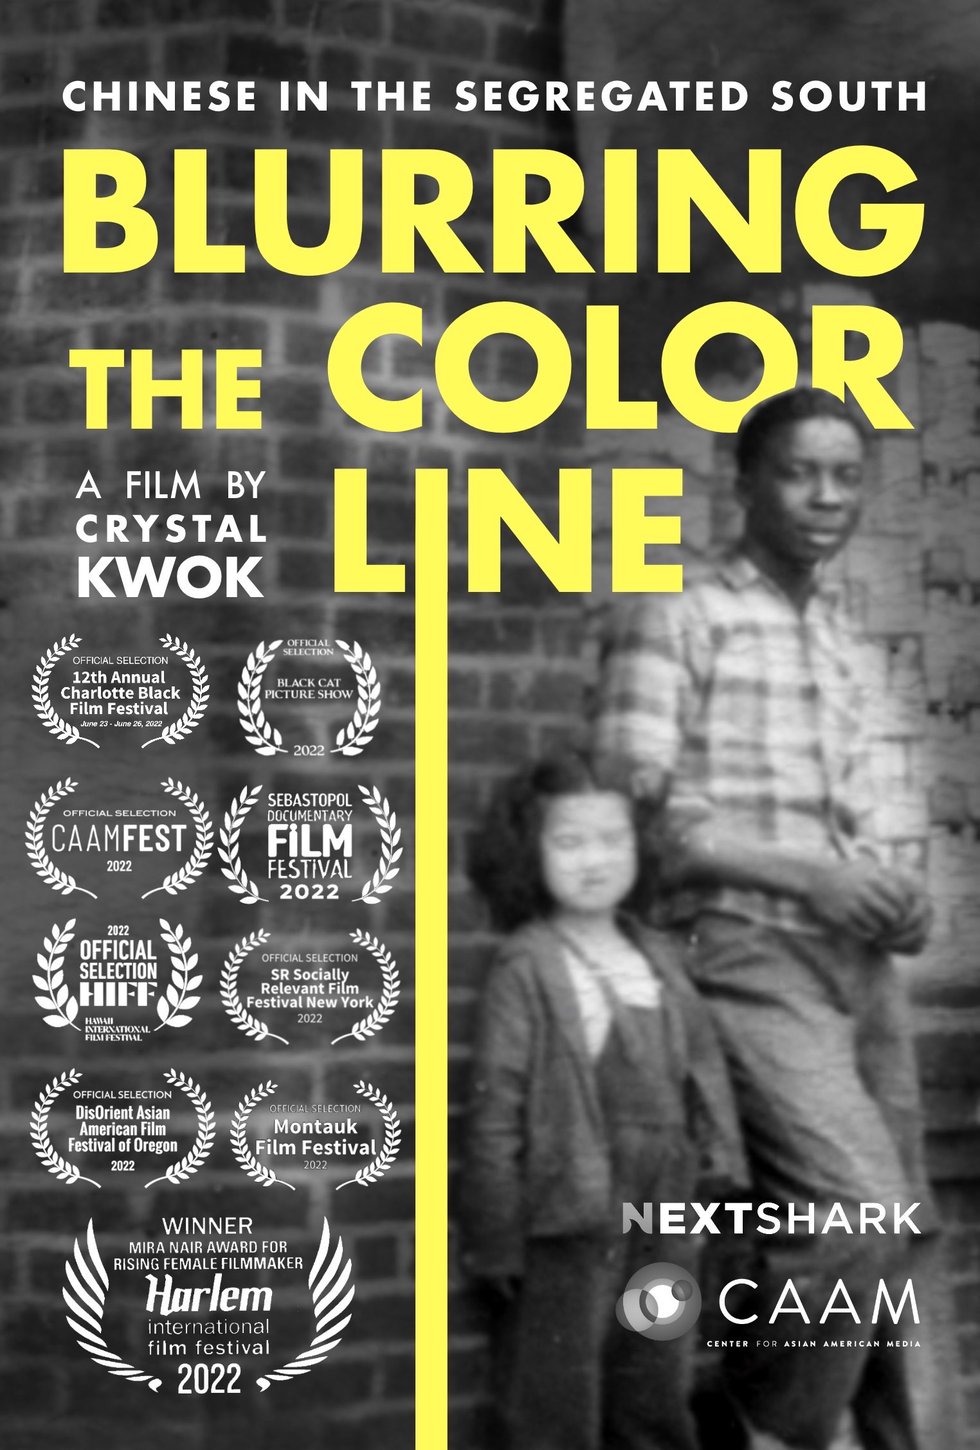 Blurring the Color Line Race Documentary